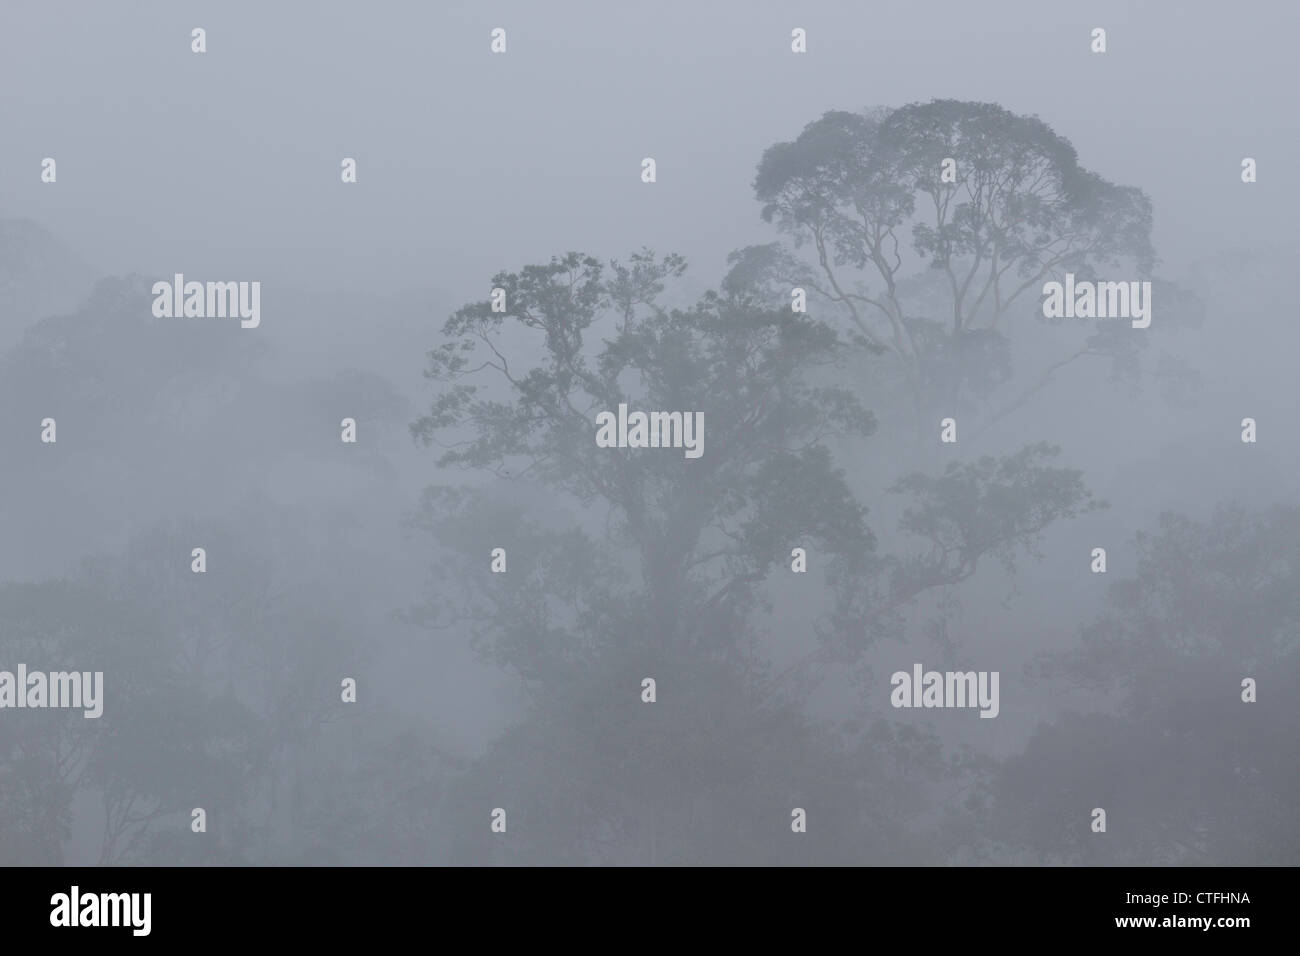 Morning mist in the Danum Valley Borneo Sabah Malaysia. Stock Photo